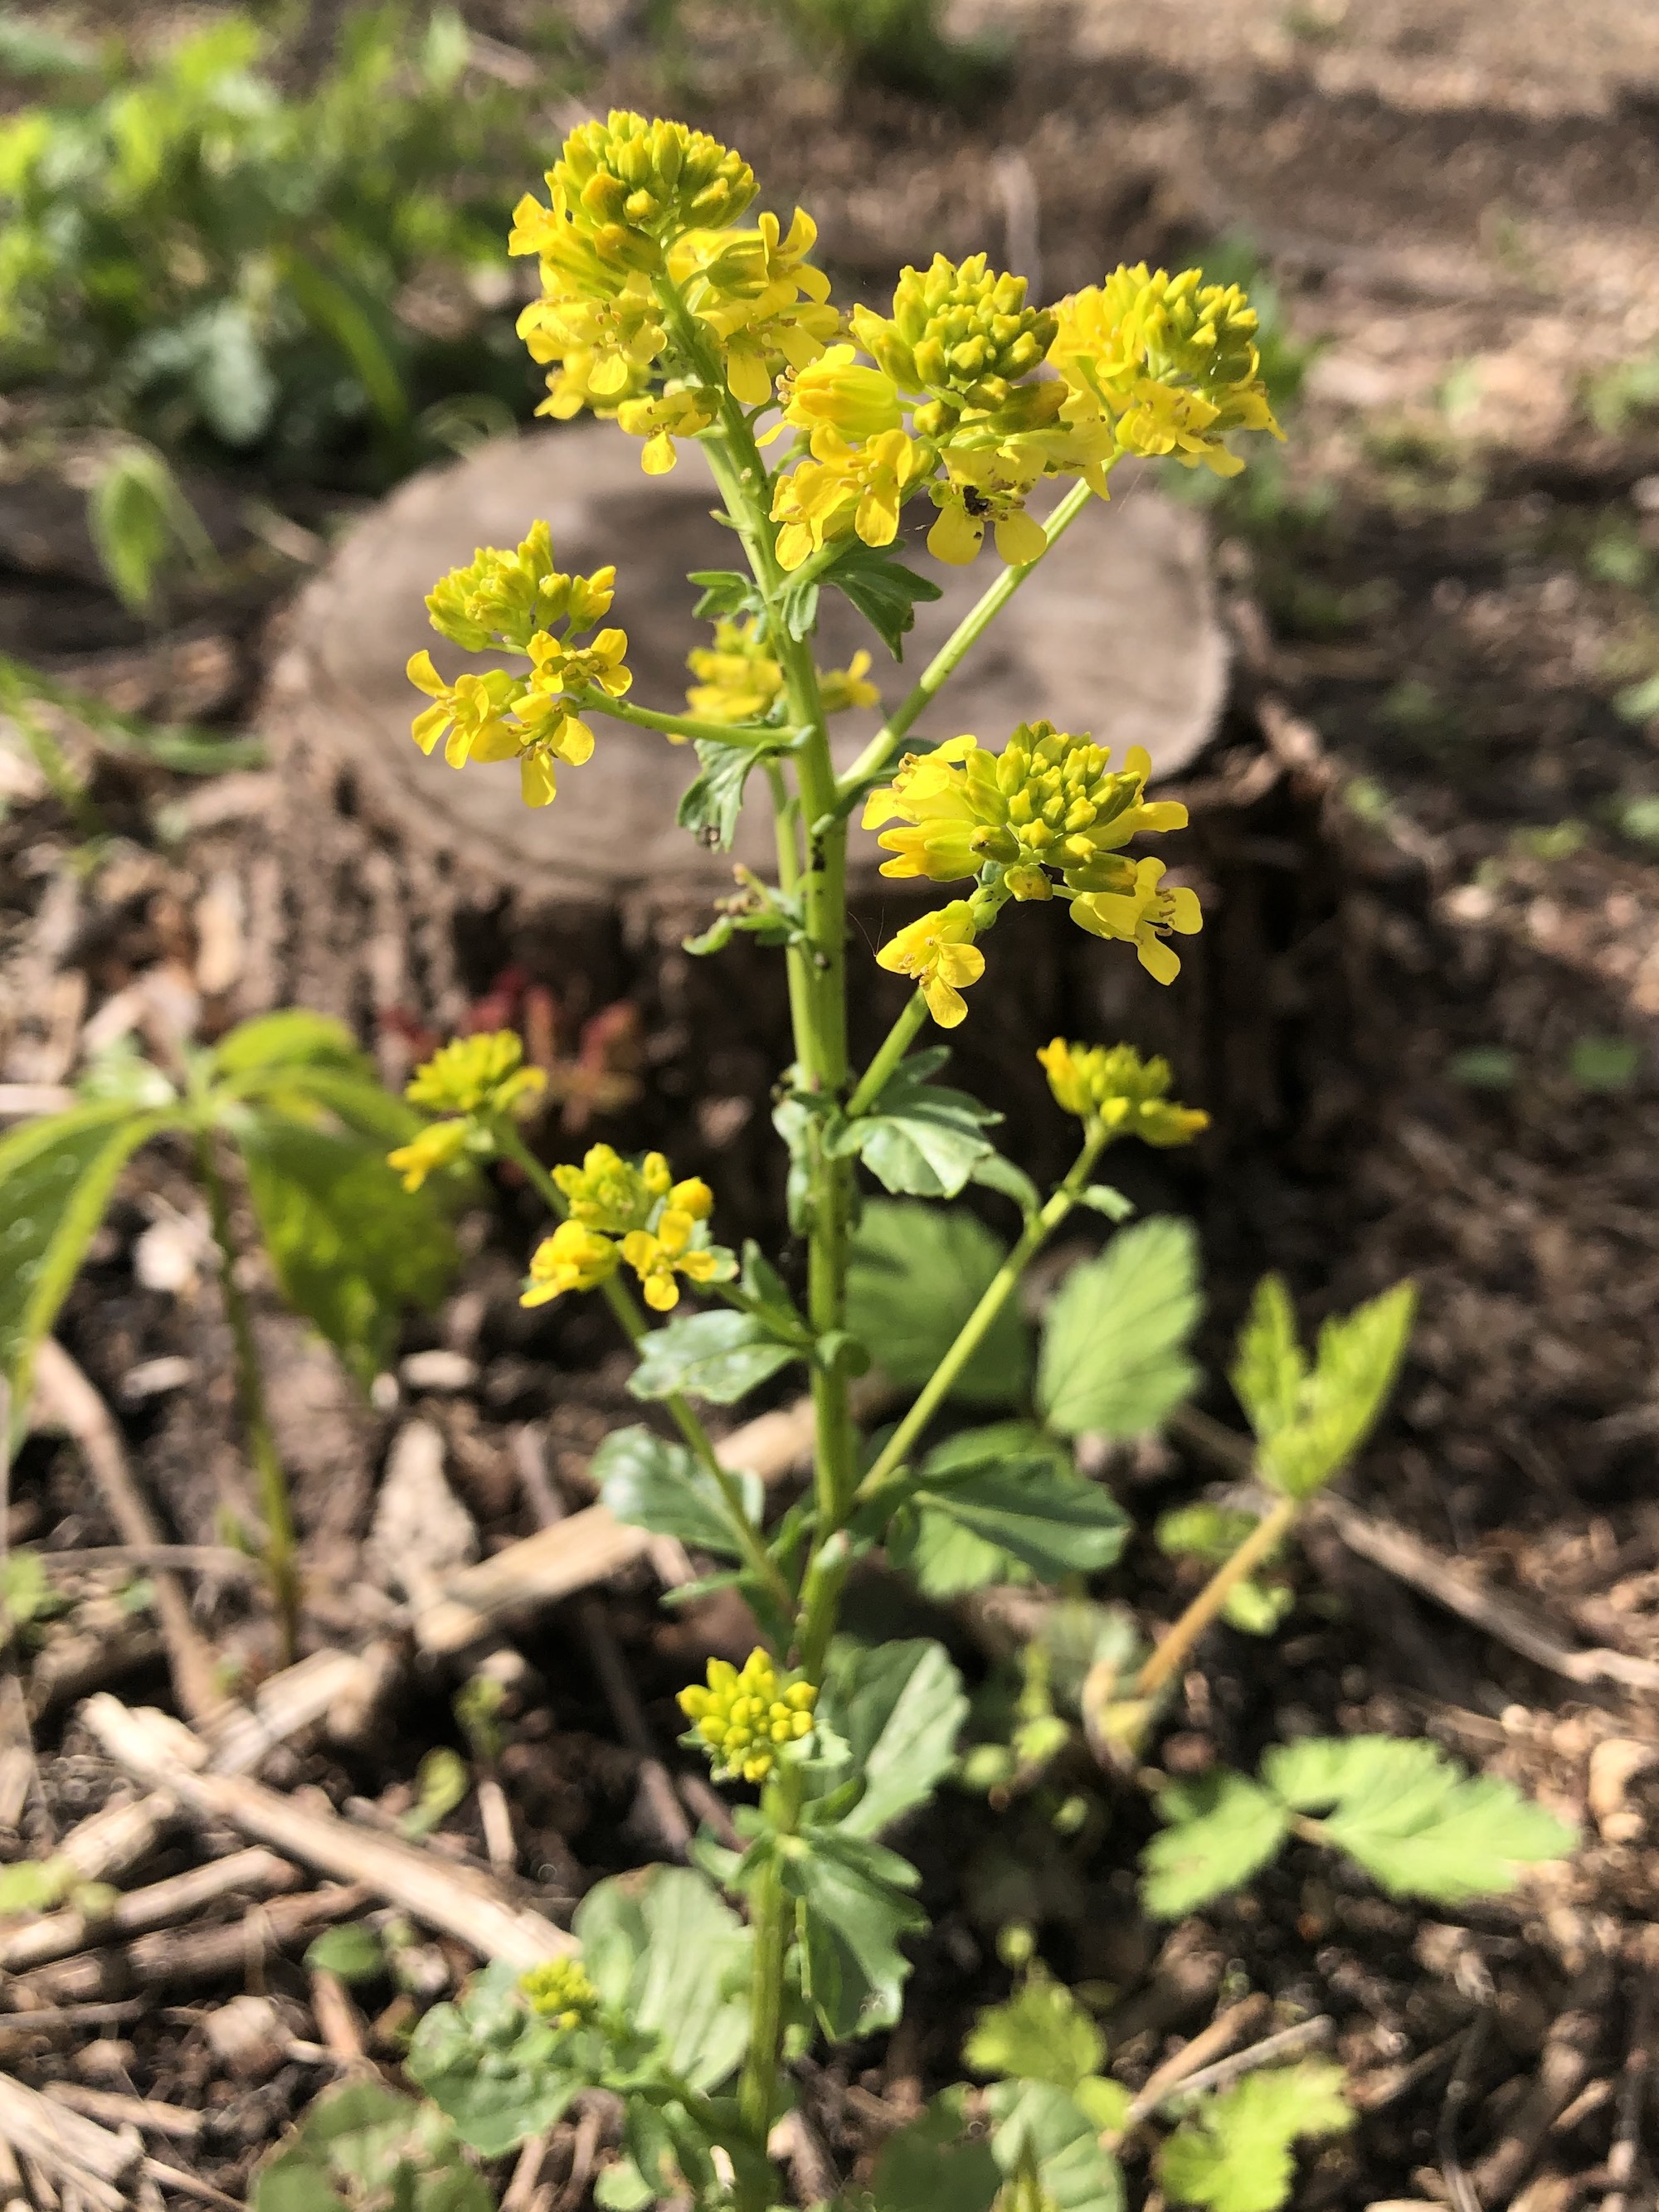 Garden Yellow Rocket in woods between Marion Dunn and Oak Savanna in Madison, Wisconsin on May 4, 2021.